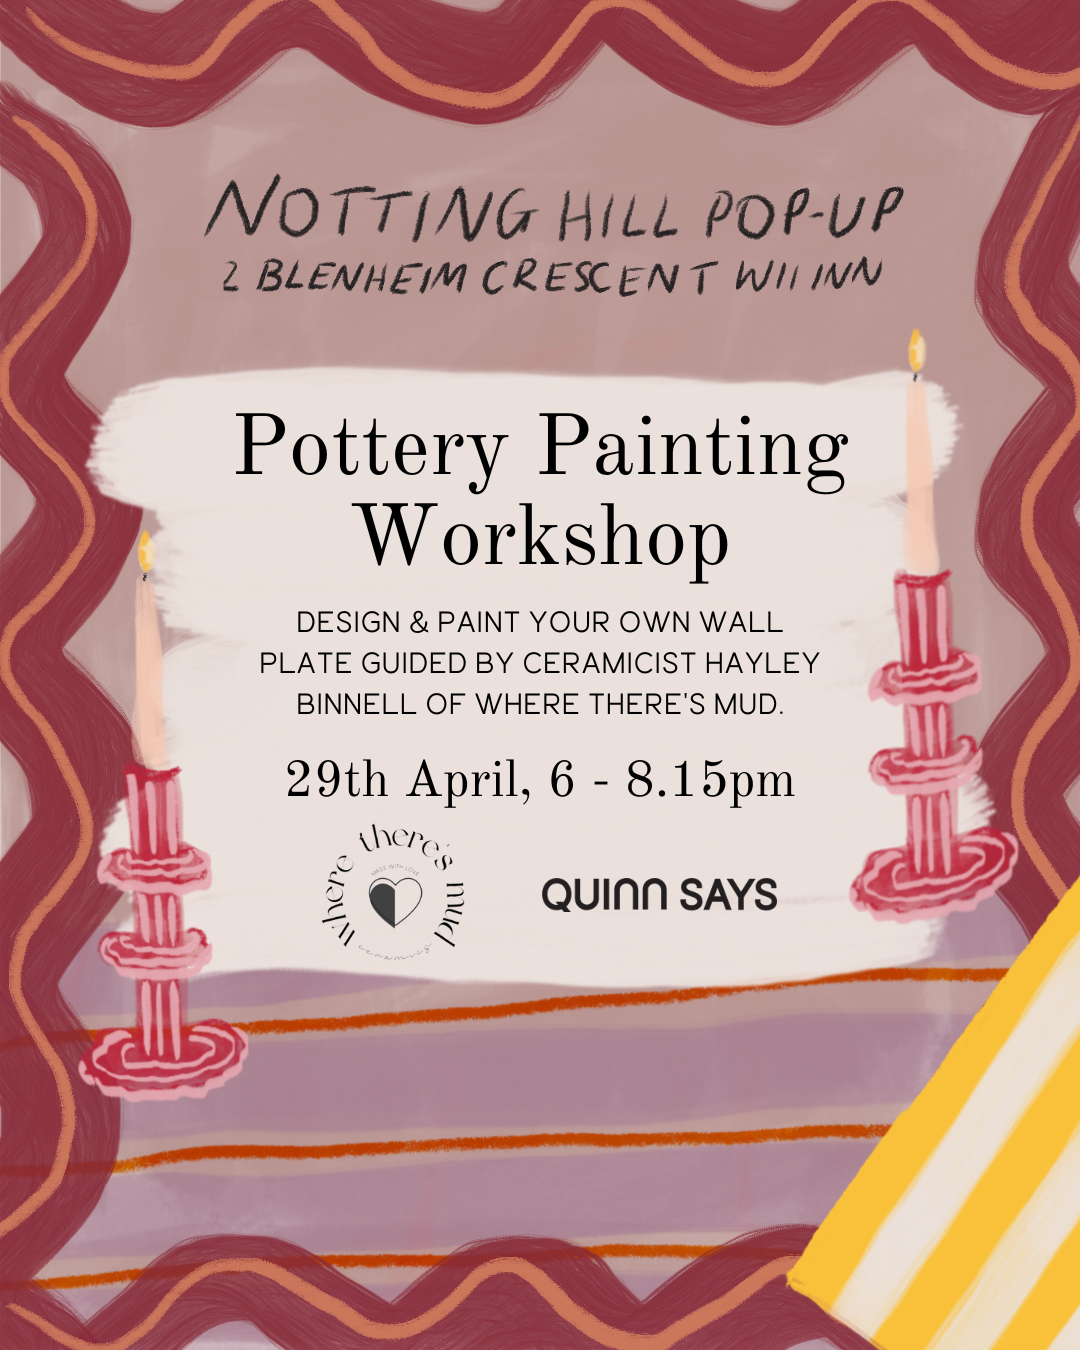  Notting Hill Pop-up Pottery Painting Workshop